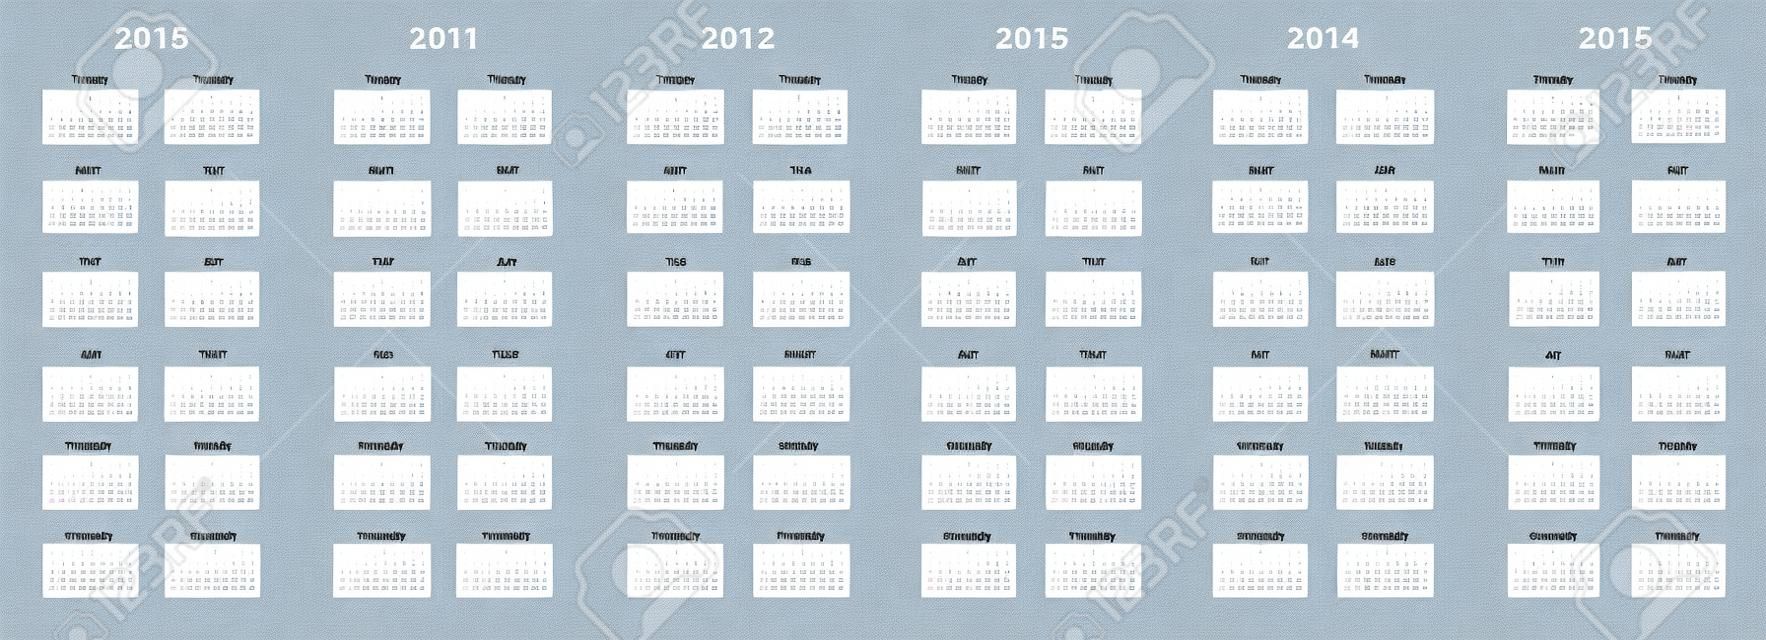 Simple calendar for years 2010, 2011, 2012, 2013, 2014 and 2015.